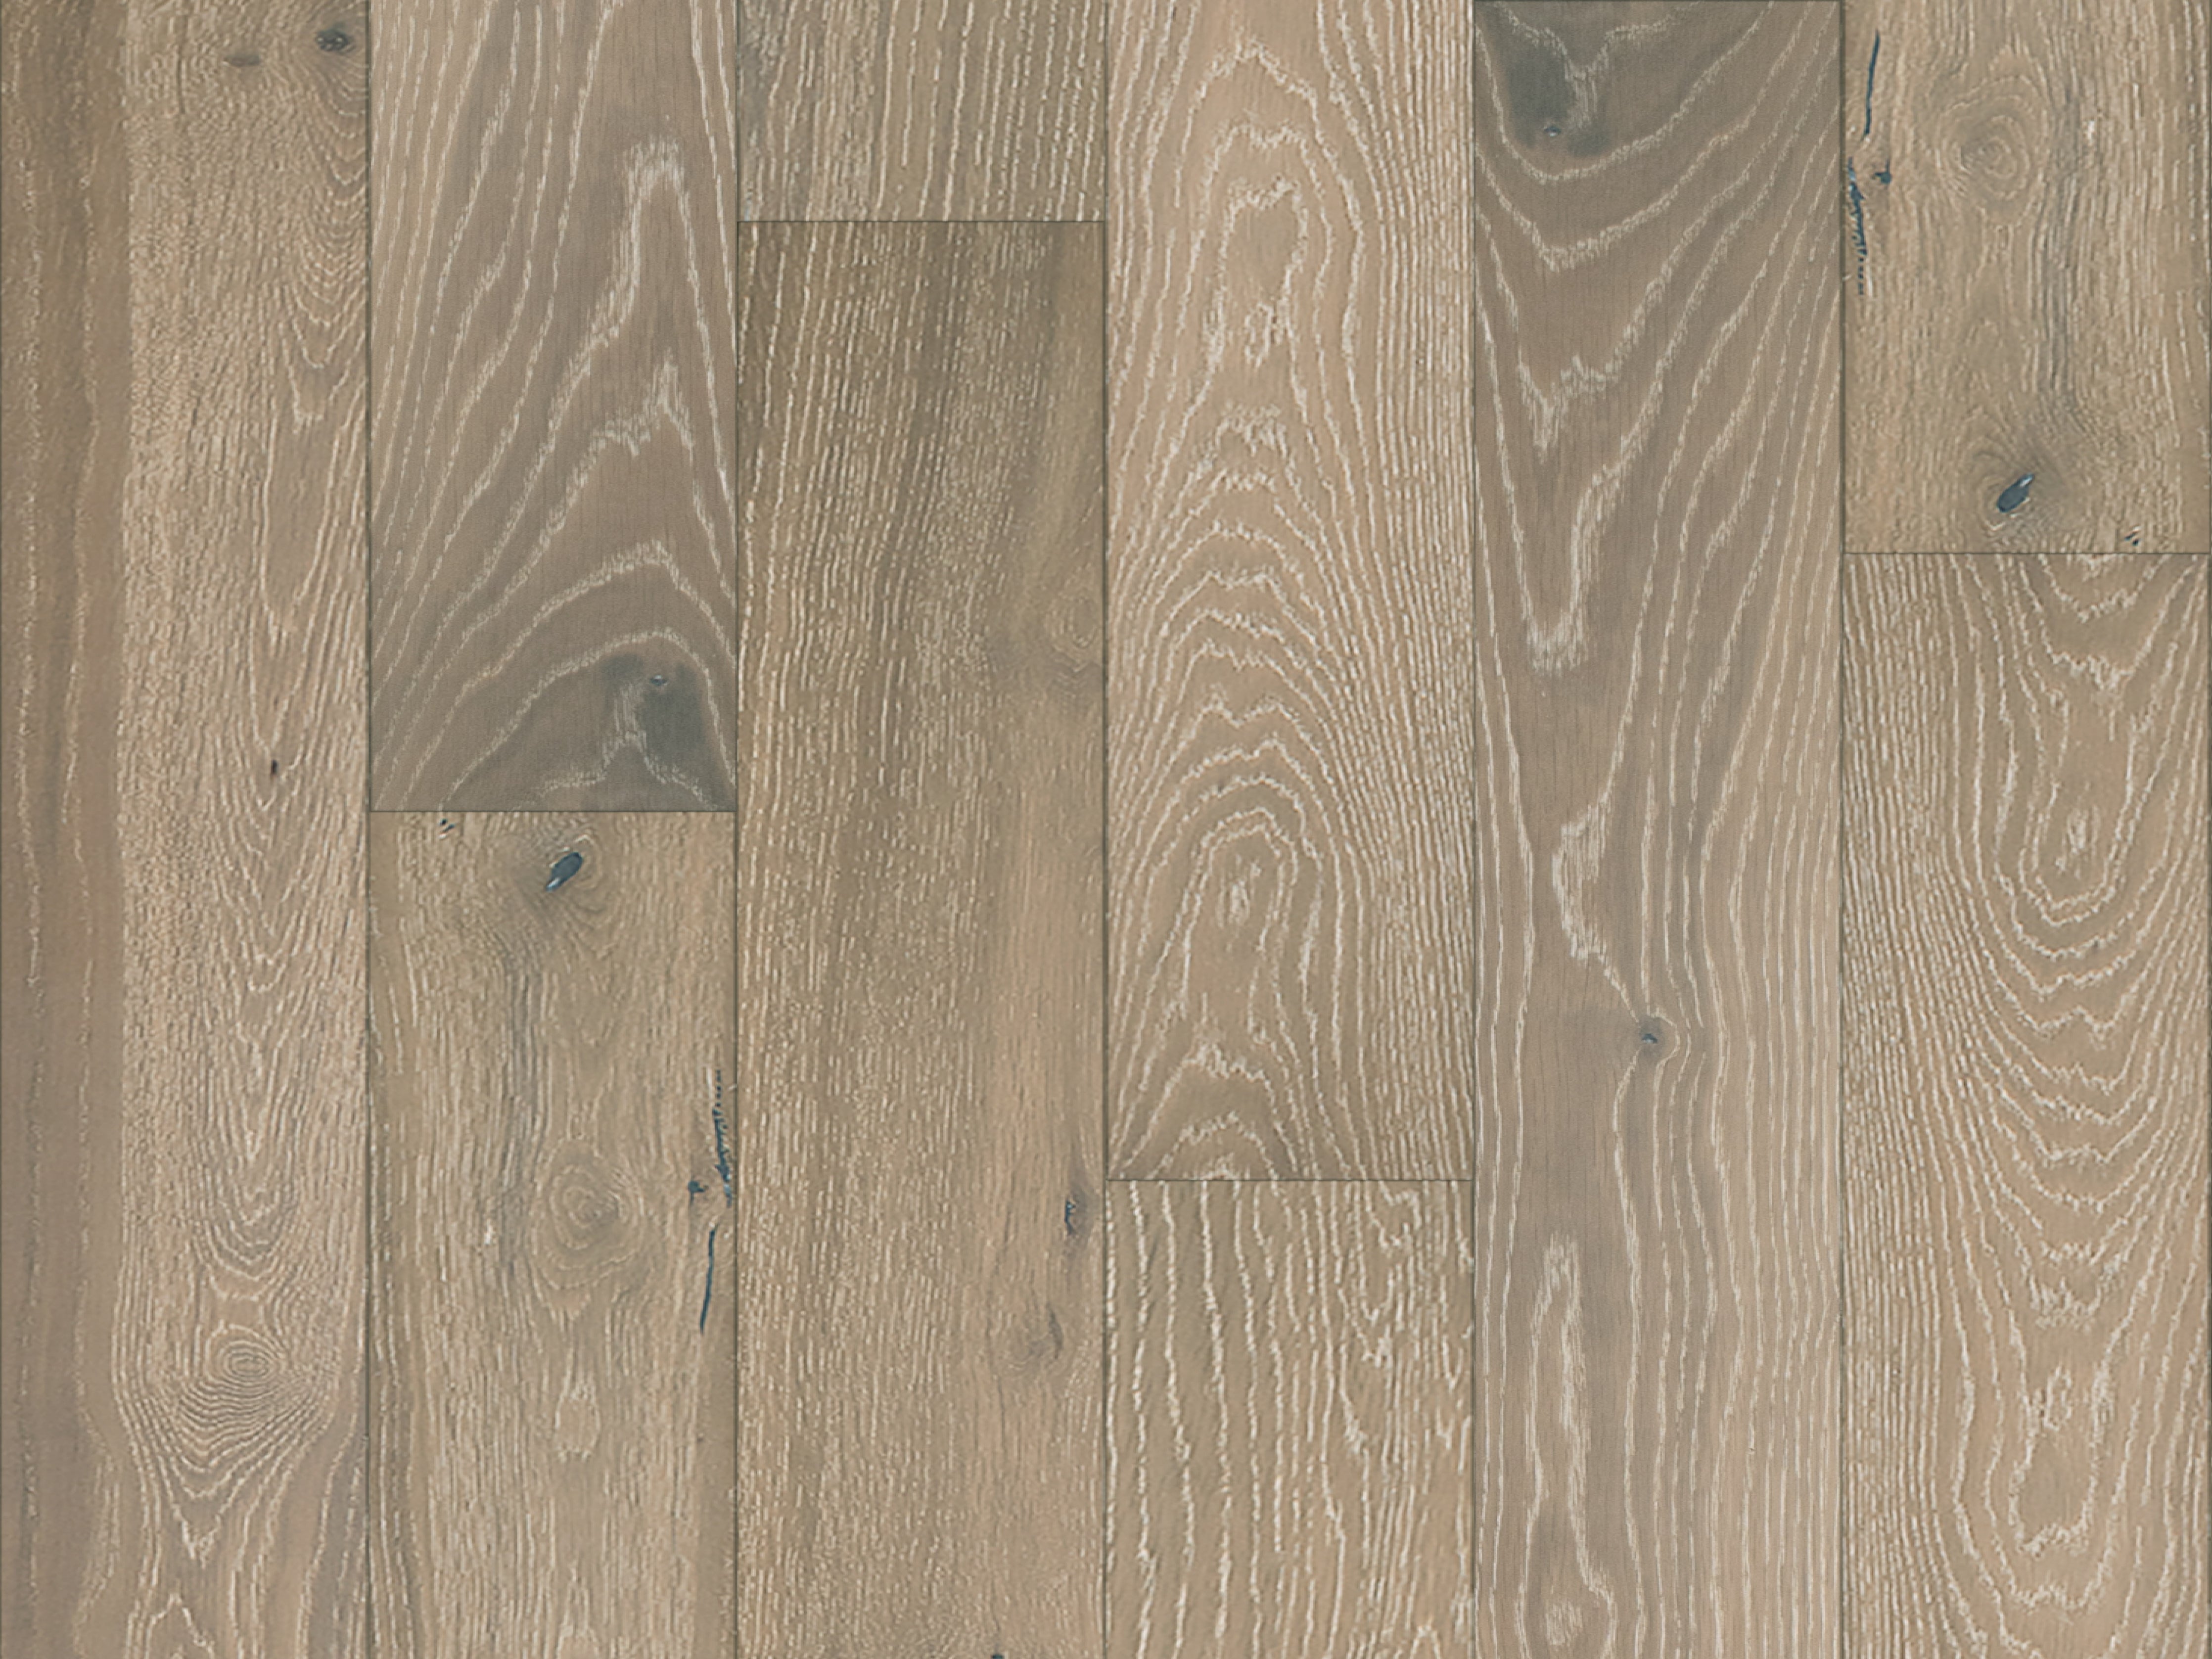 duchateau the guild lineage hailee european oak engineered hardnatural wood floor uv lacquer finish for interior use distributed by surface group international